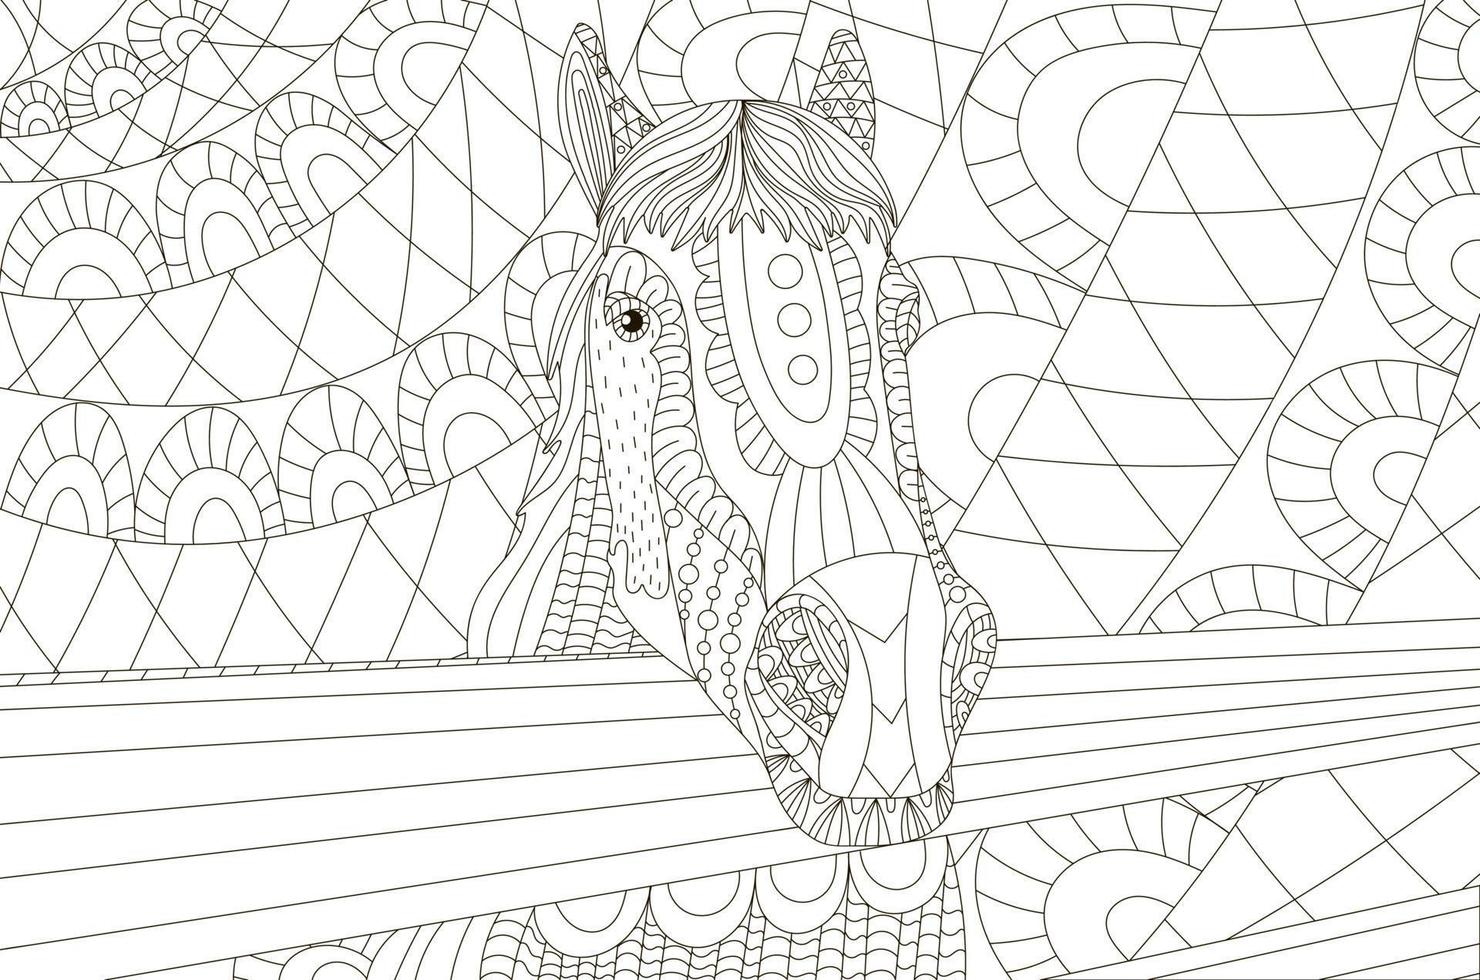 Zentangle stylized horse antistress coloring page for adults in black and white style for print vector